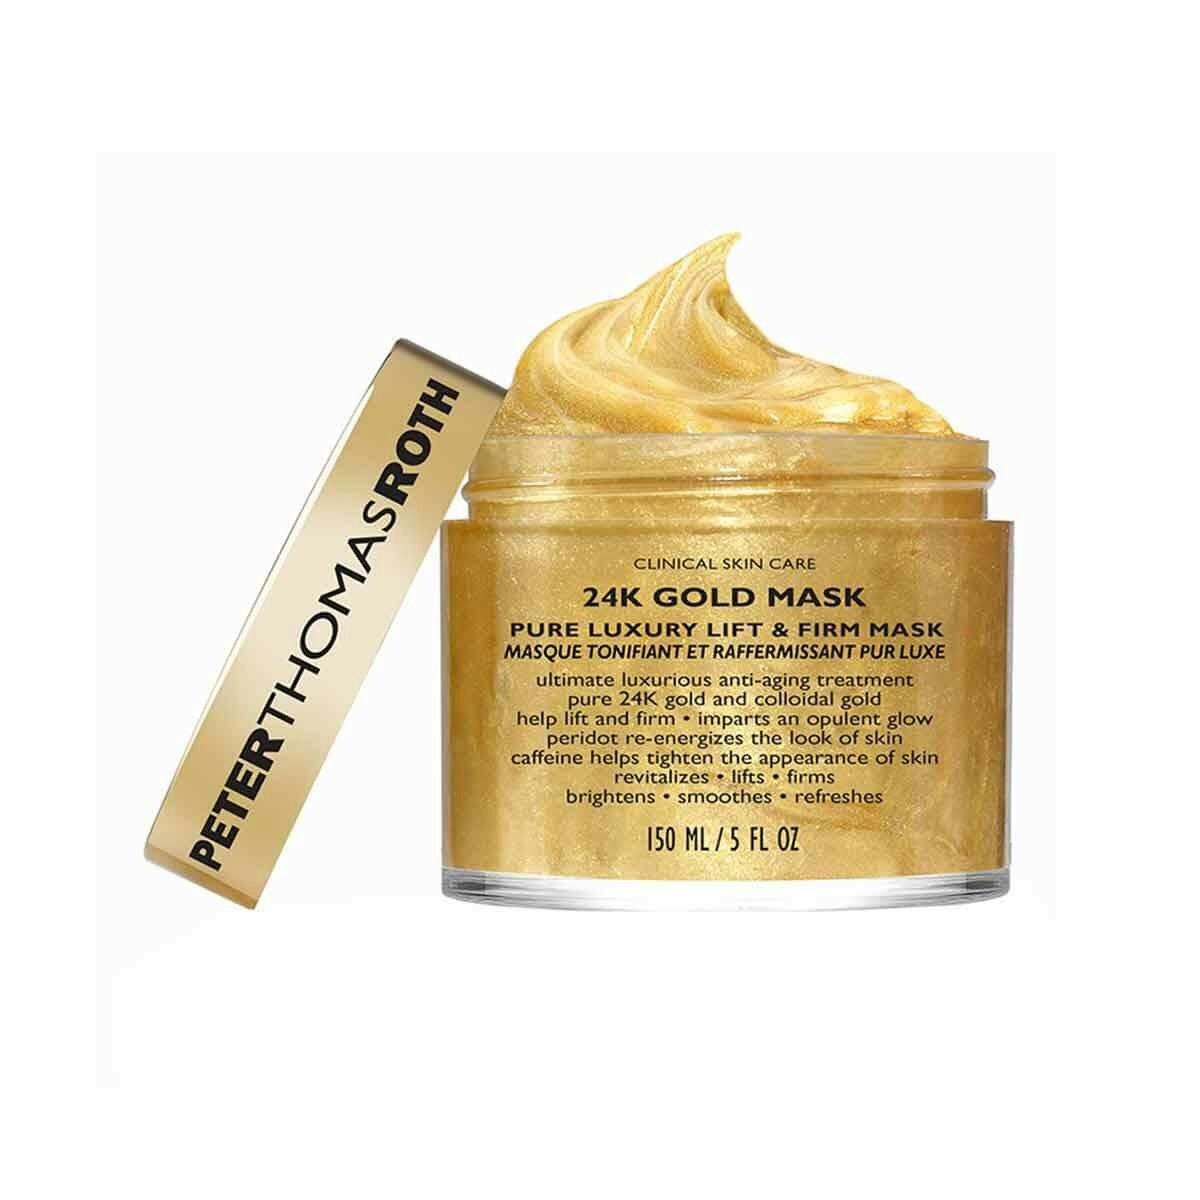 Peter Thomas Roth Peter Thomas Roth Peter Thomas Roth 24K GOLD MASK Pure Luxury Lift & Firm Mask 150ml